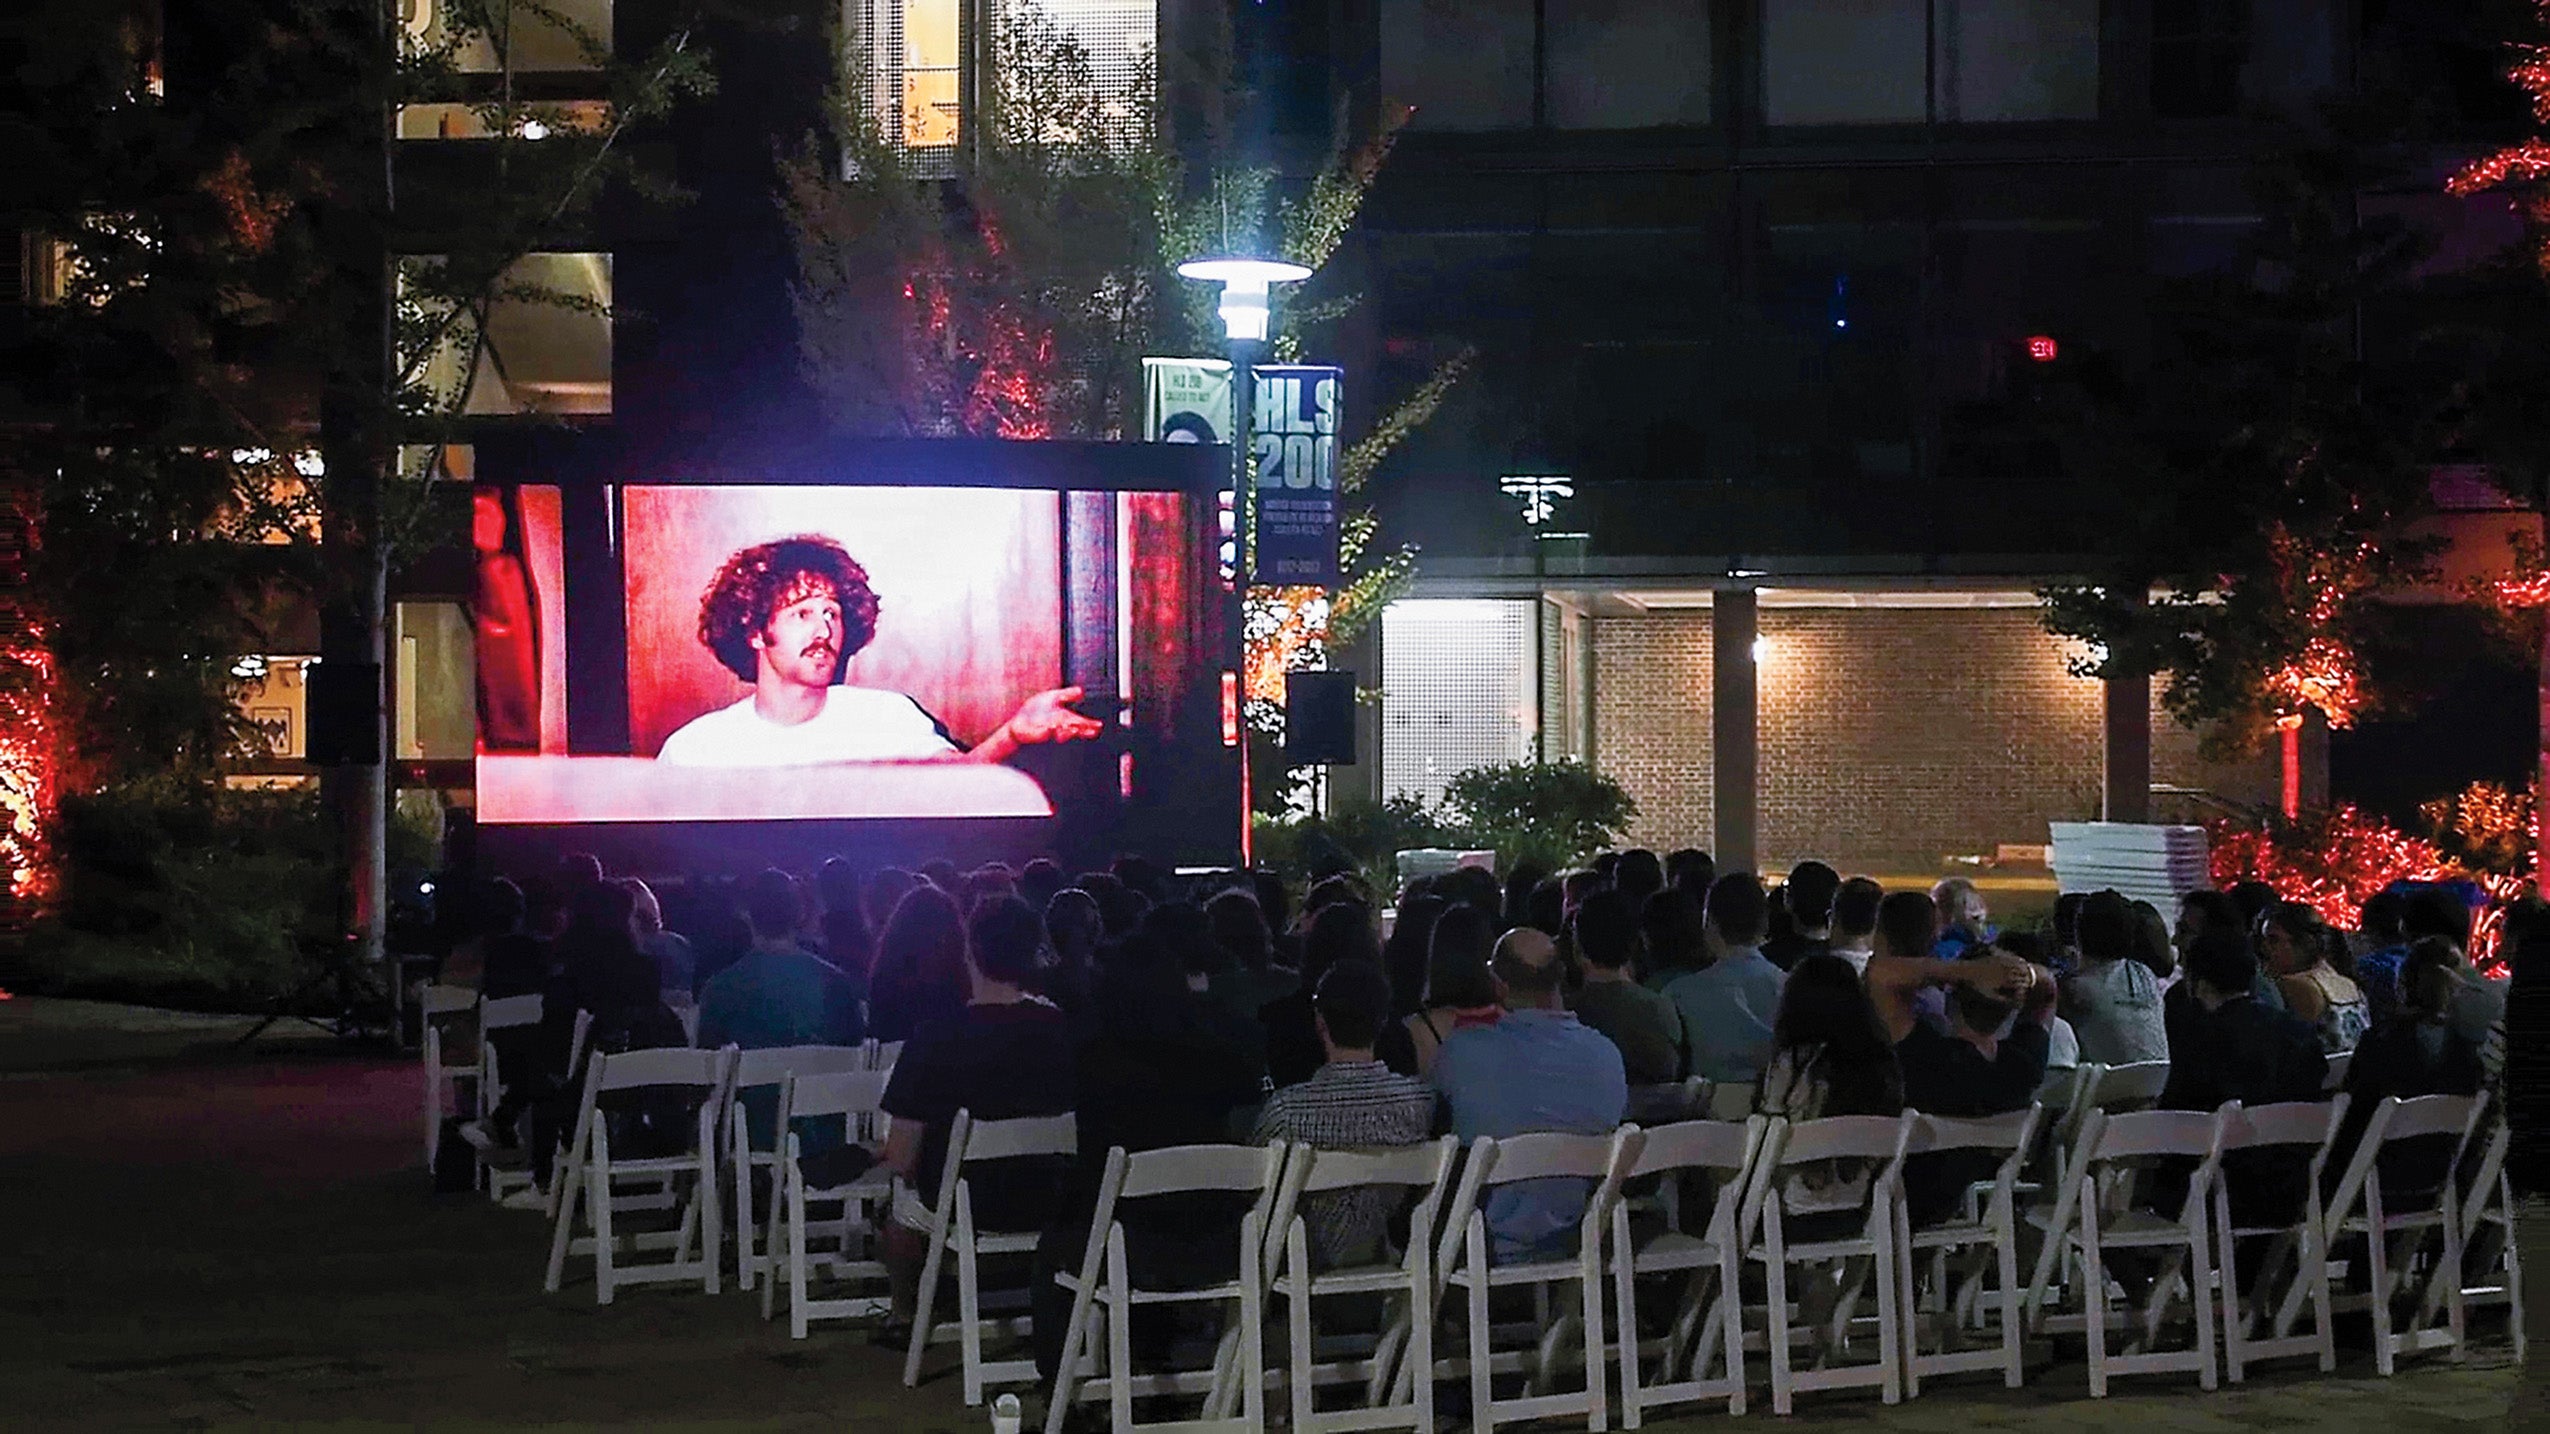 Audience watching ‘The Paper Chase’ outdoors